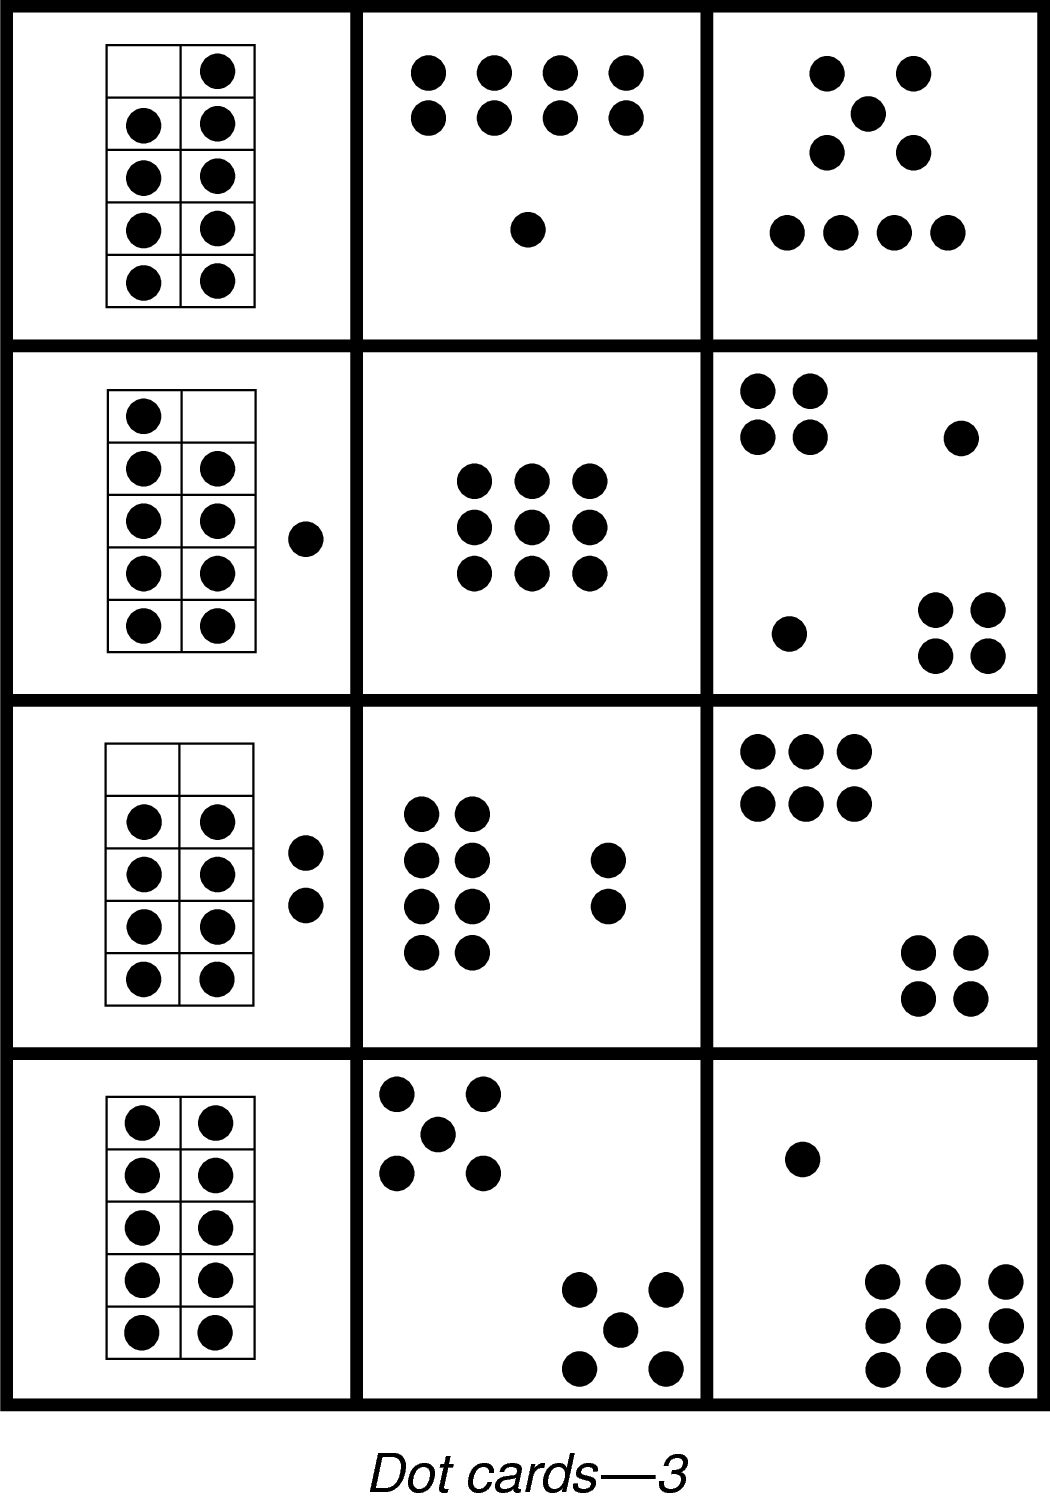 5 Best Images of Printable Dot Cards 1 20 - Free Printable Number Dot